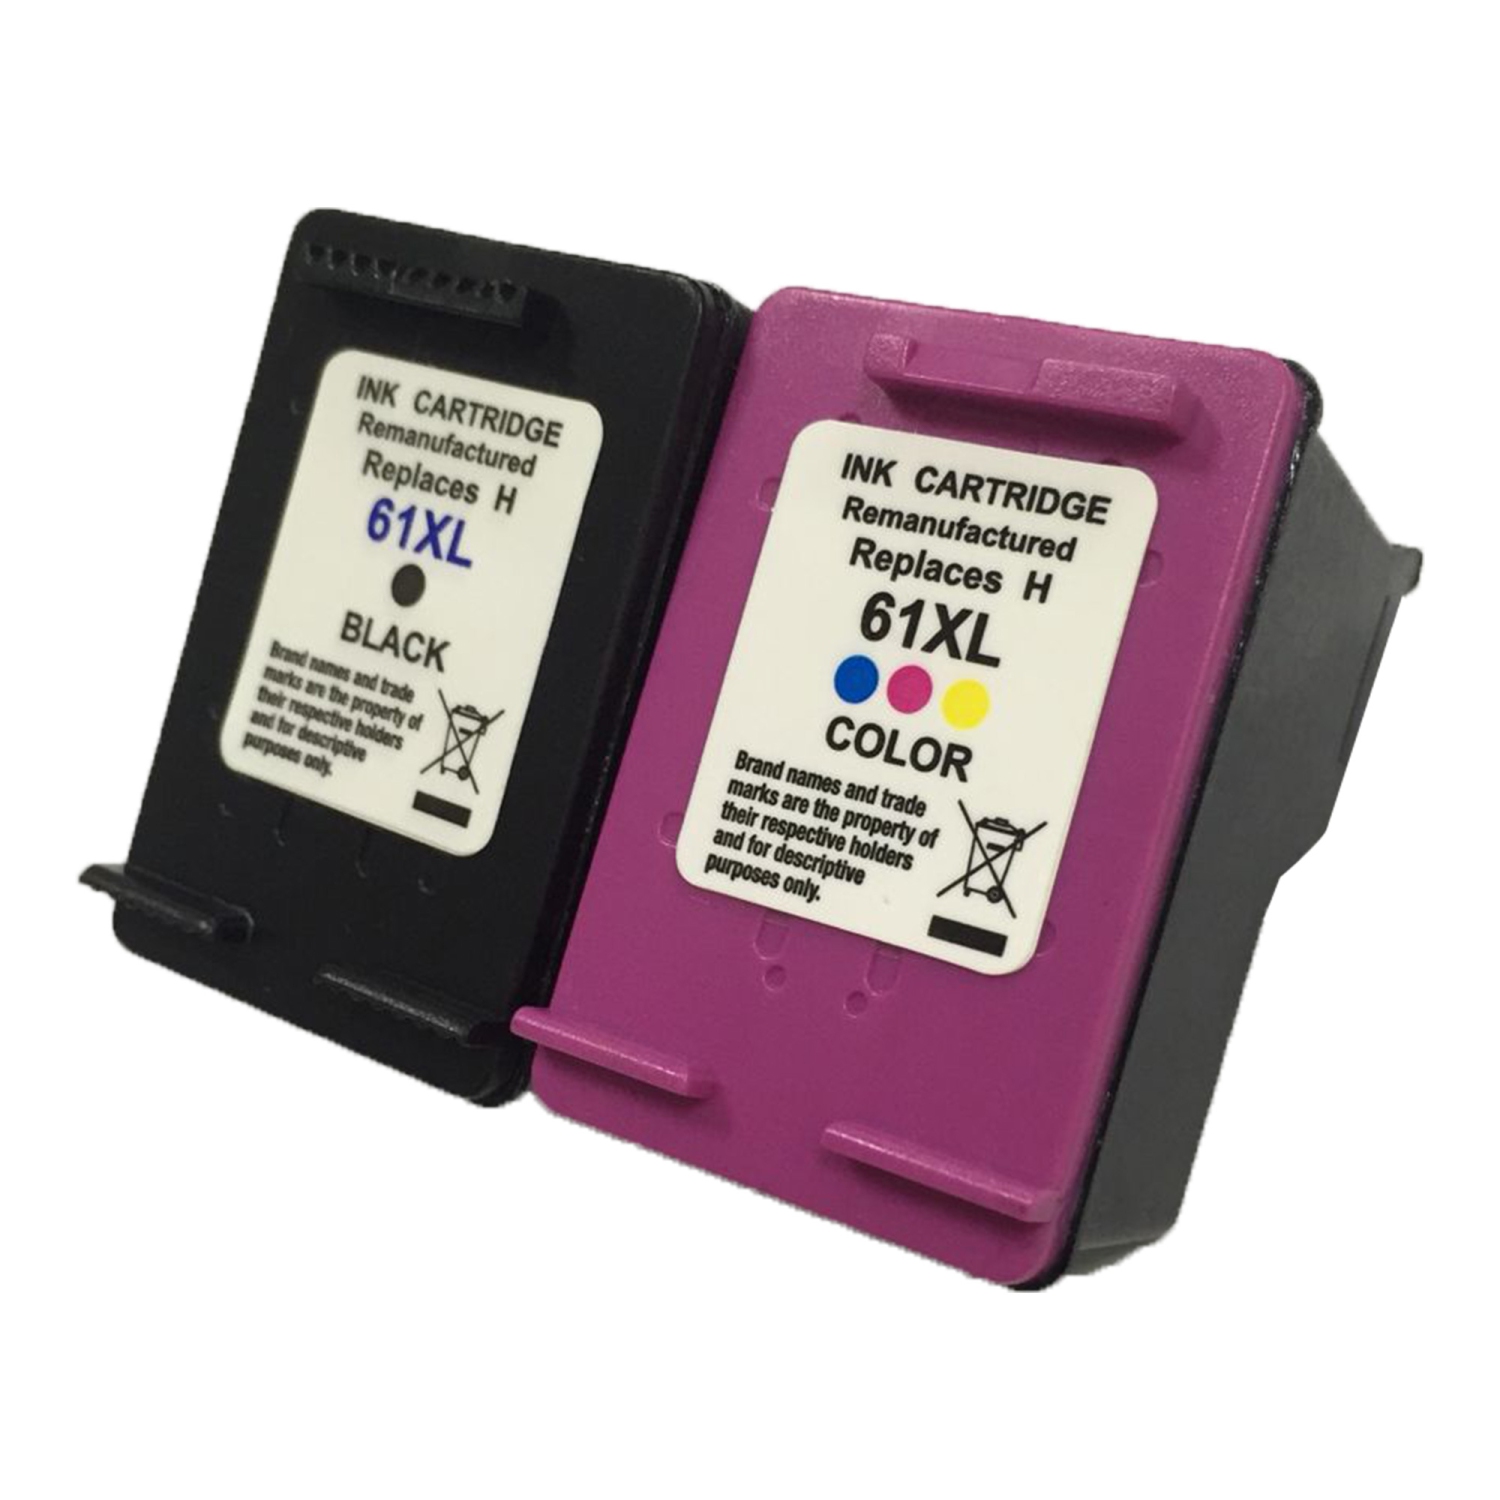 NEW SUPERIOR QUALITY! HP 61XL Compatible Ink Cartridge Set (BK, CLR) - FREE SHIPPING OVER $50!!